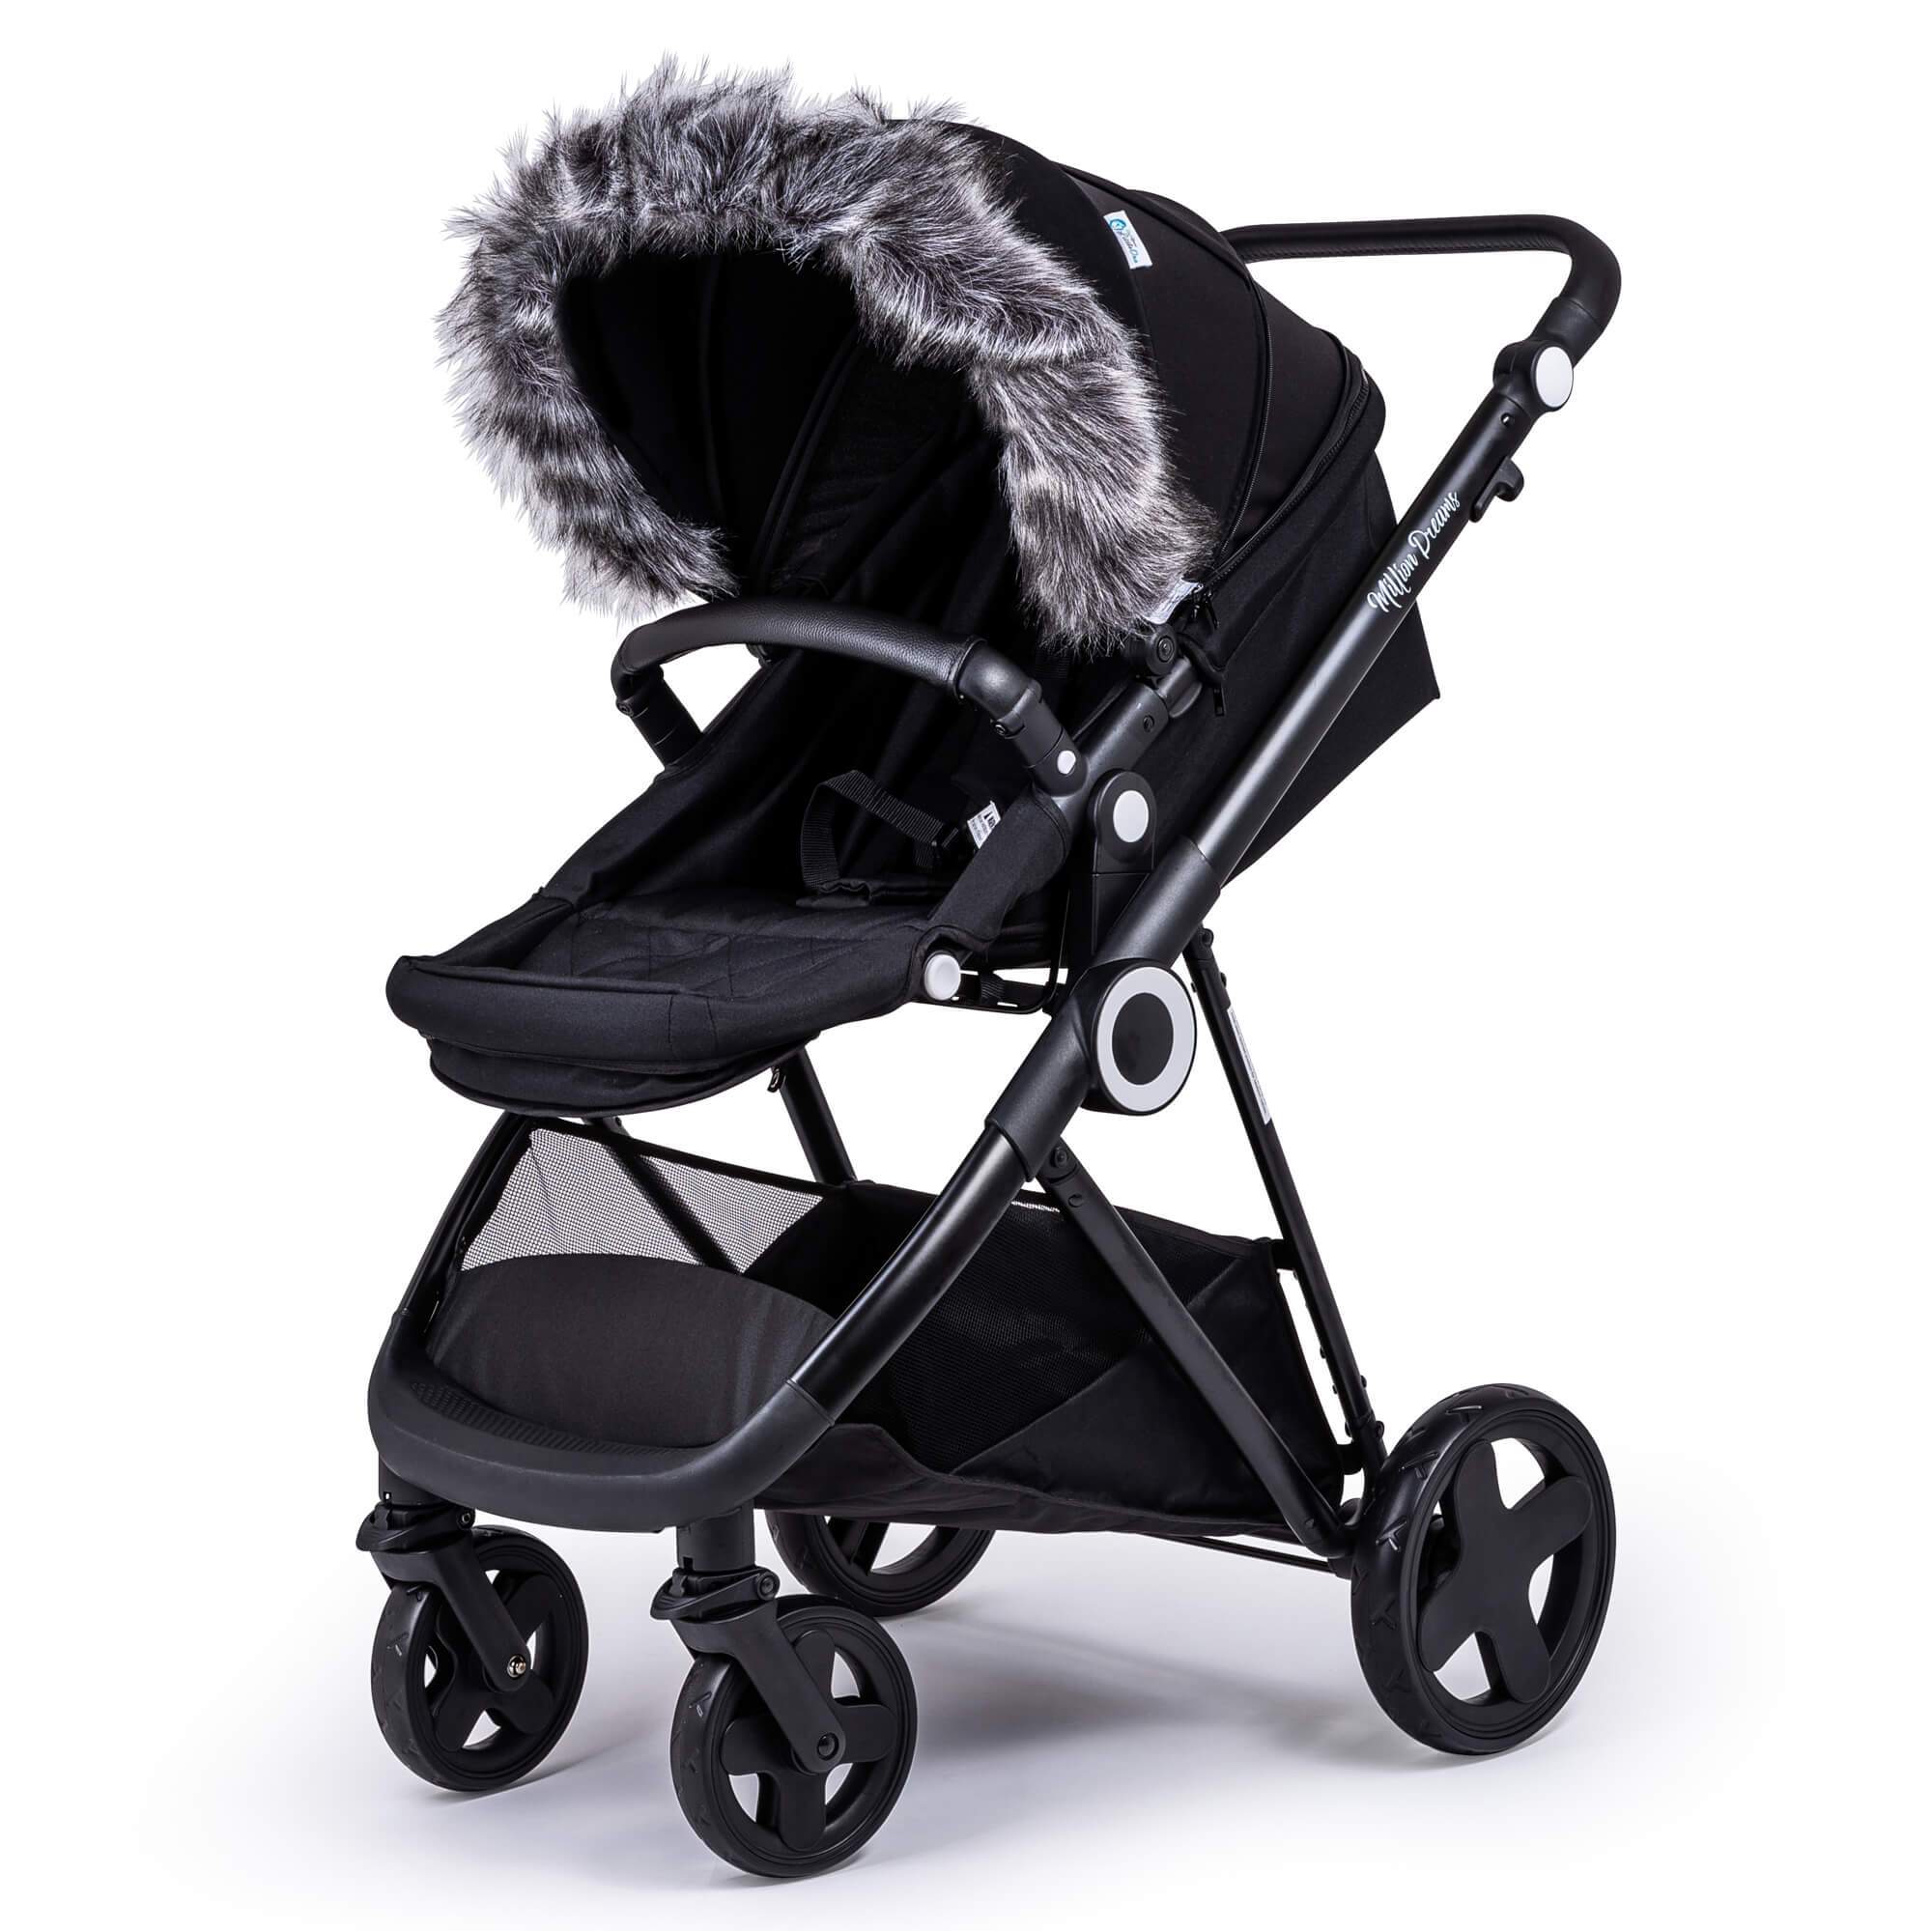 Pram Fur Hood Trim Attachment for Pushchair Compatible with Mamas & Papas - Dark Grey / Fits All Models | For Your Little One